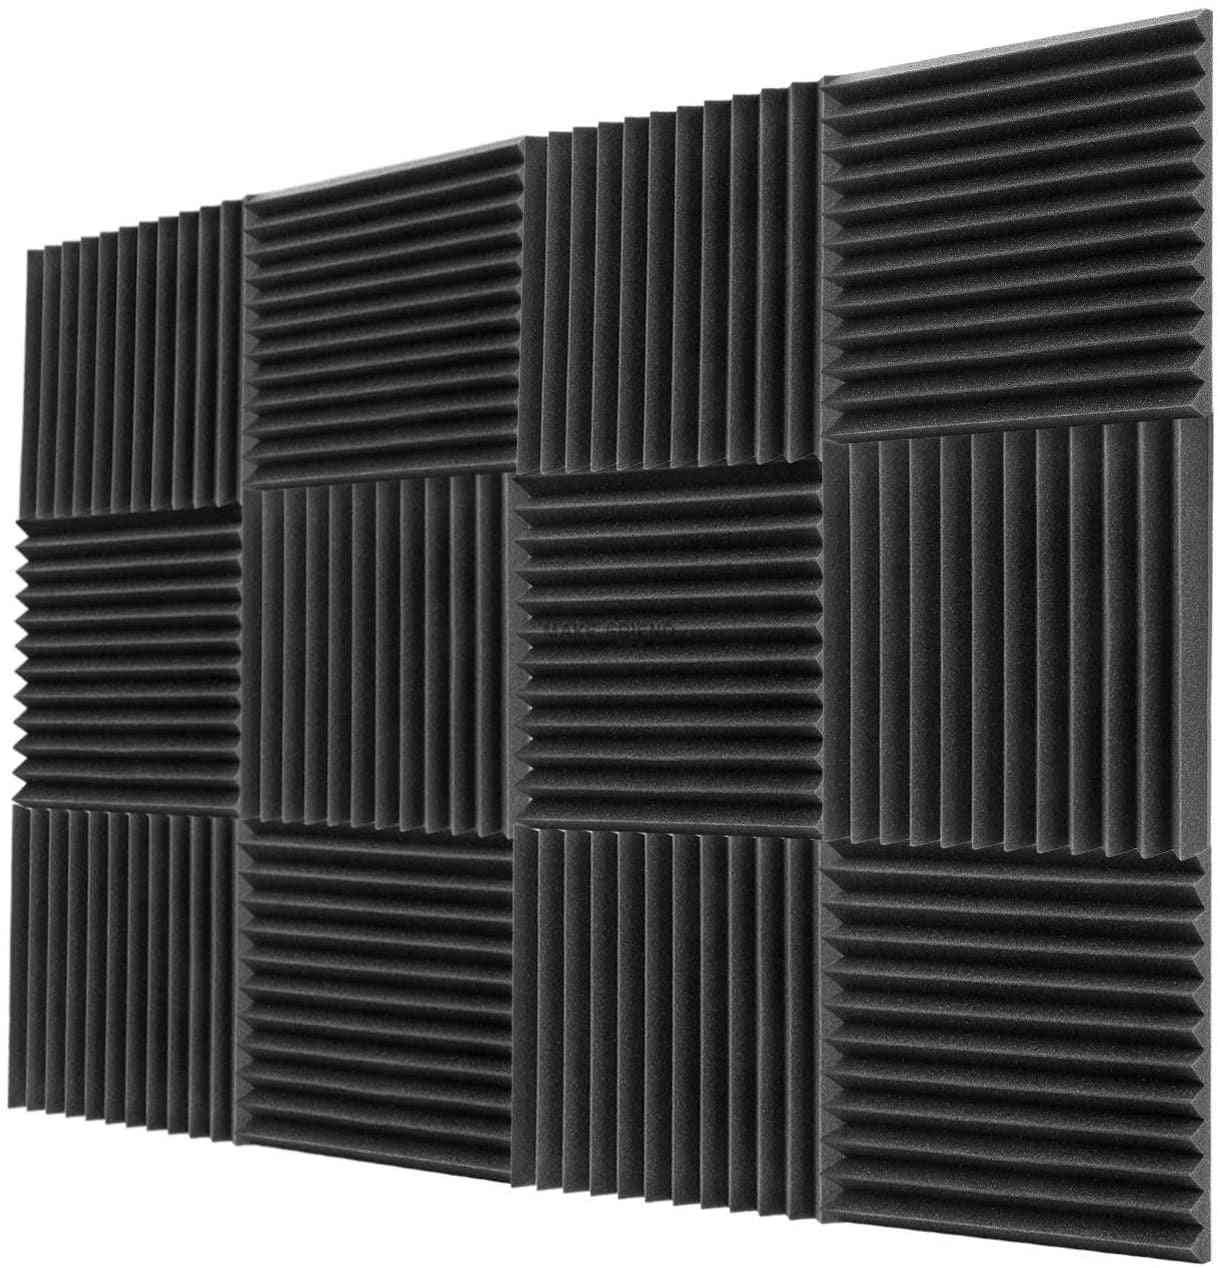 Acoustic Foam Sound Insulation Panels For Soundproofing Studio